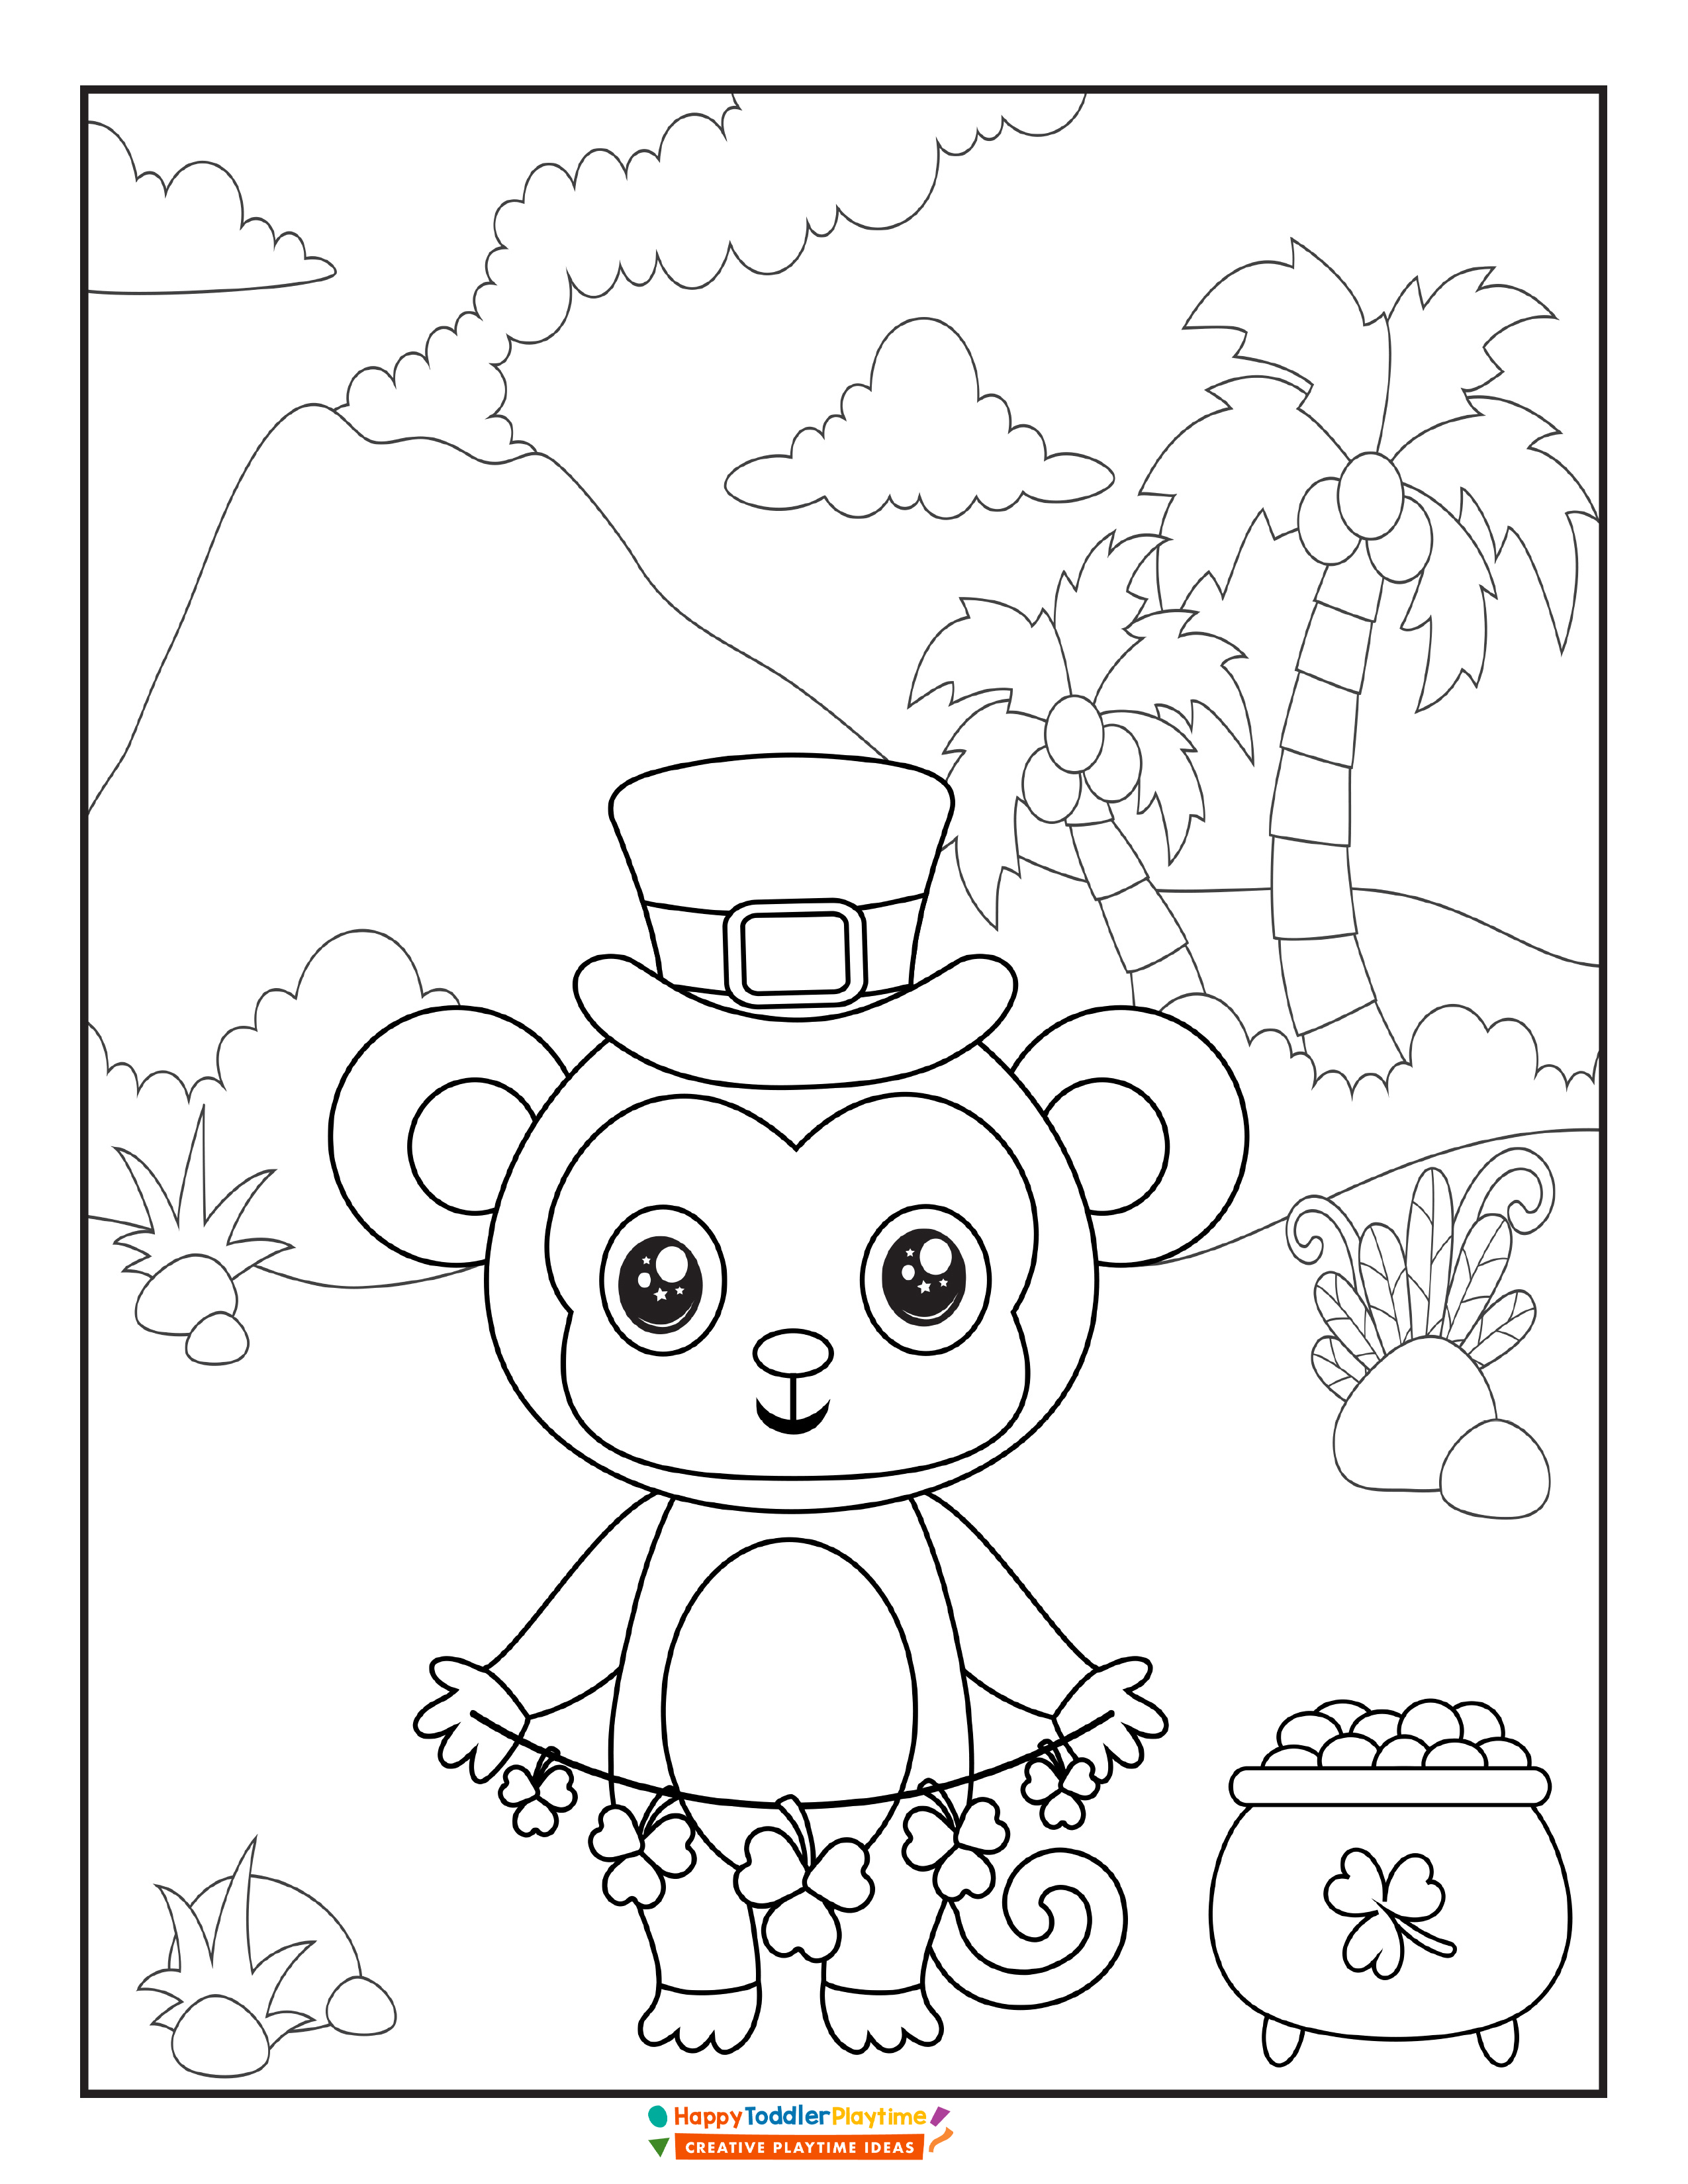 St patricks day coloring pages with free printable